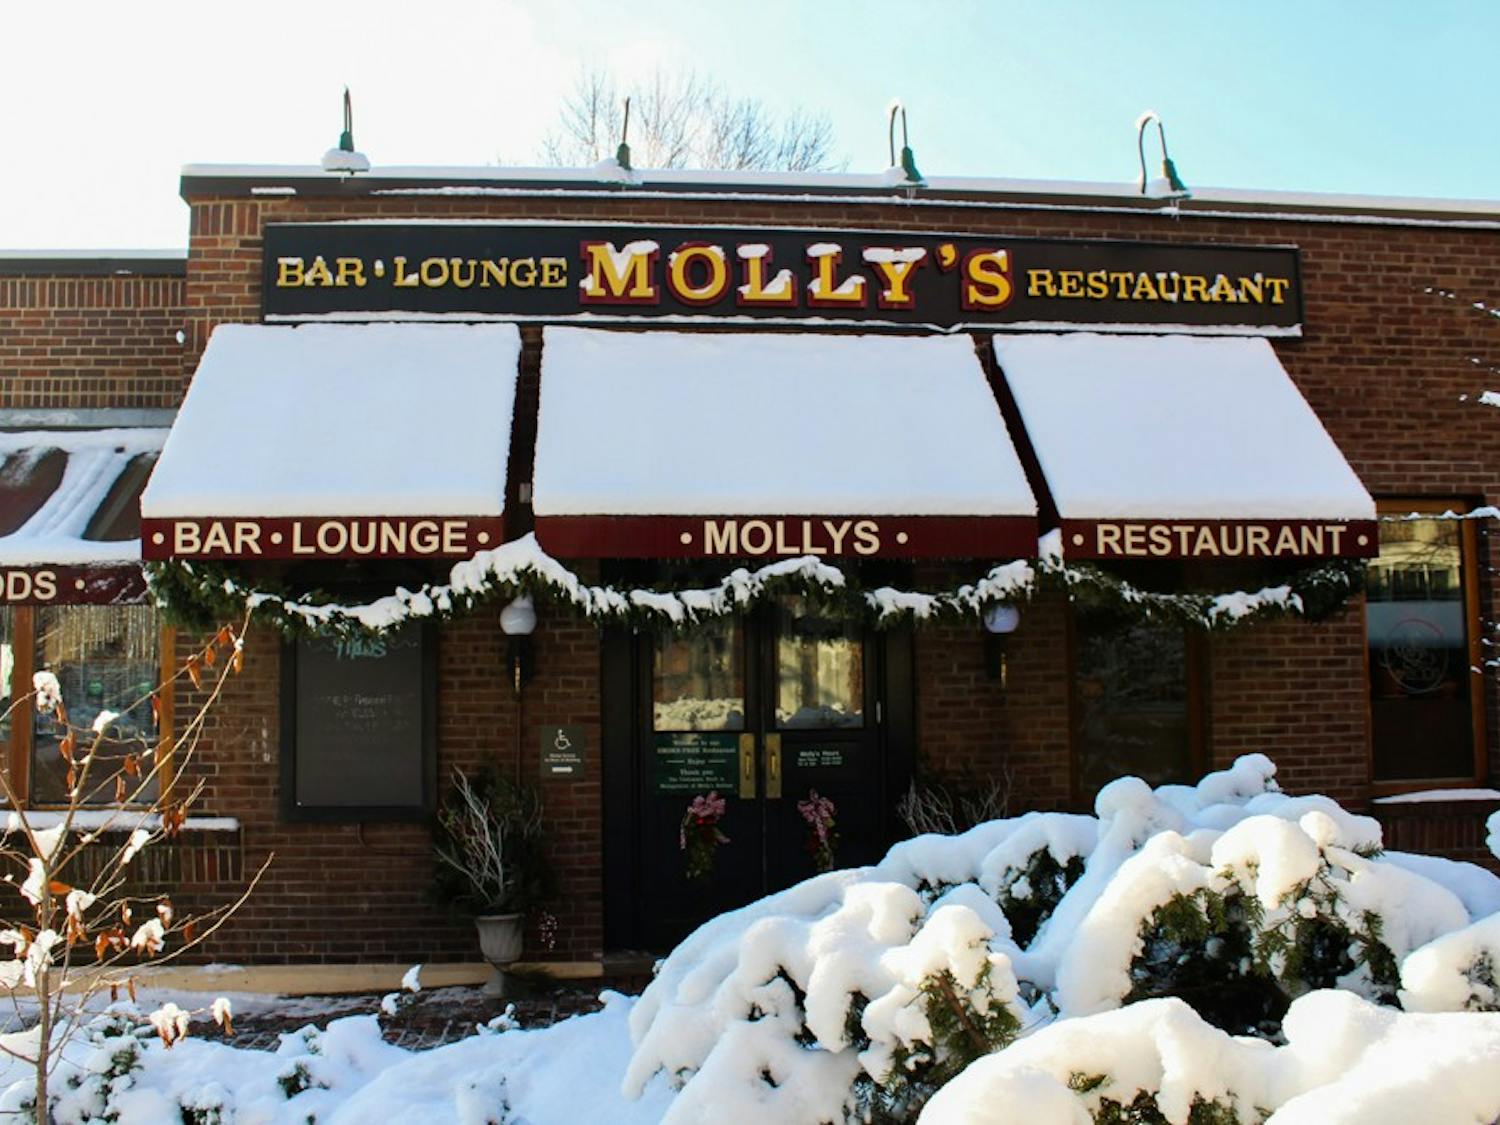 Jesse's and Molly's, two Upper Valley restaurants, are now owned by Anthony and Erin Barnett.